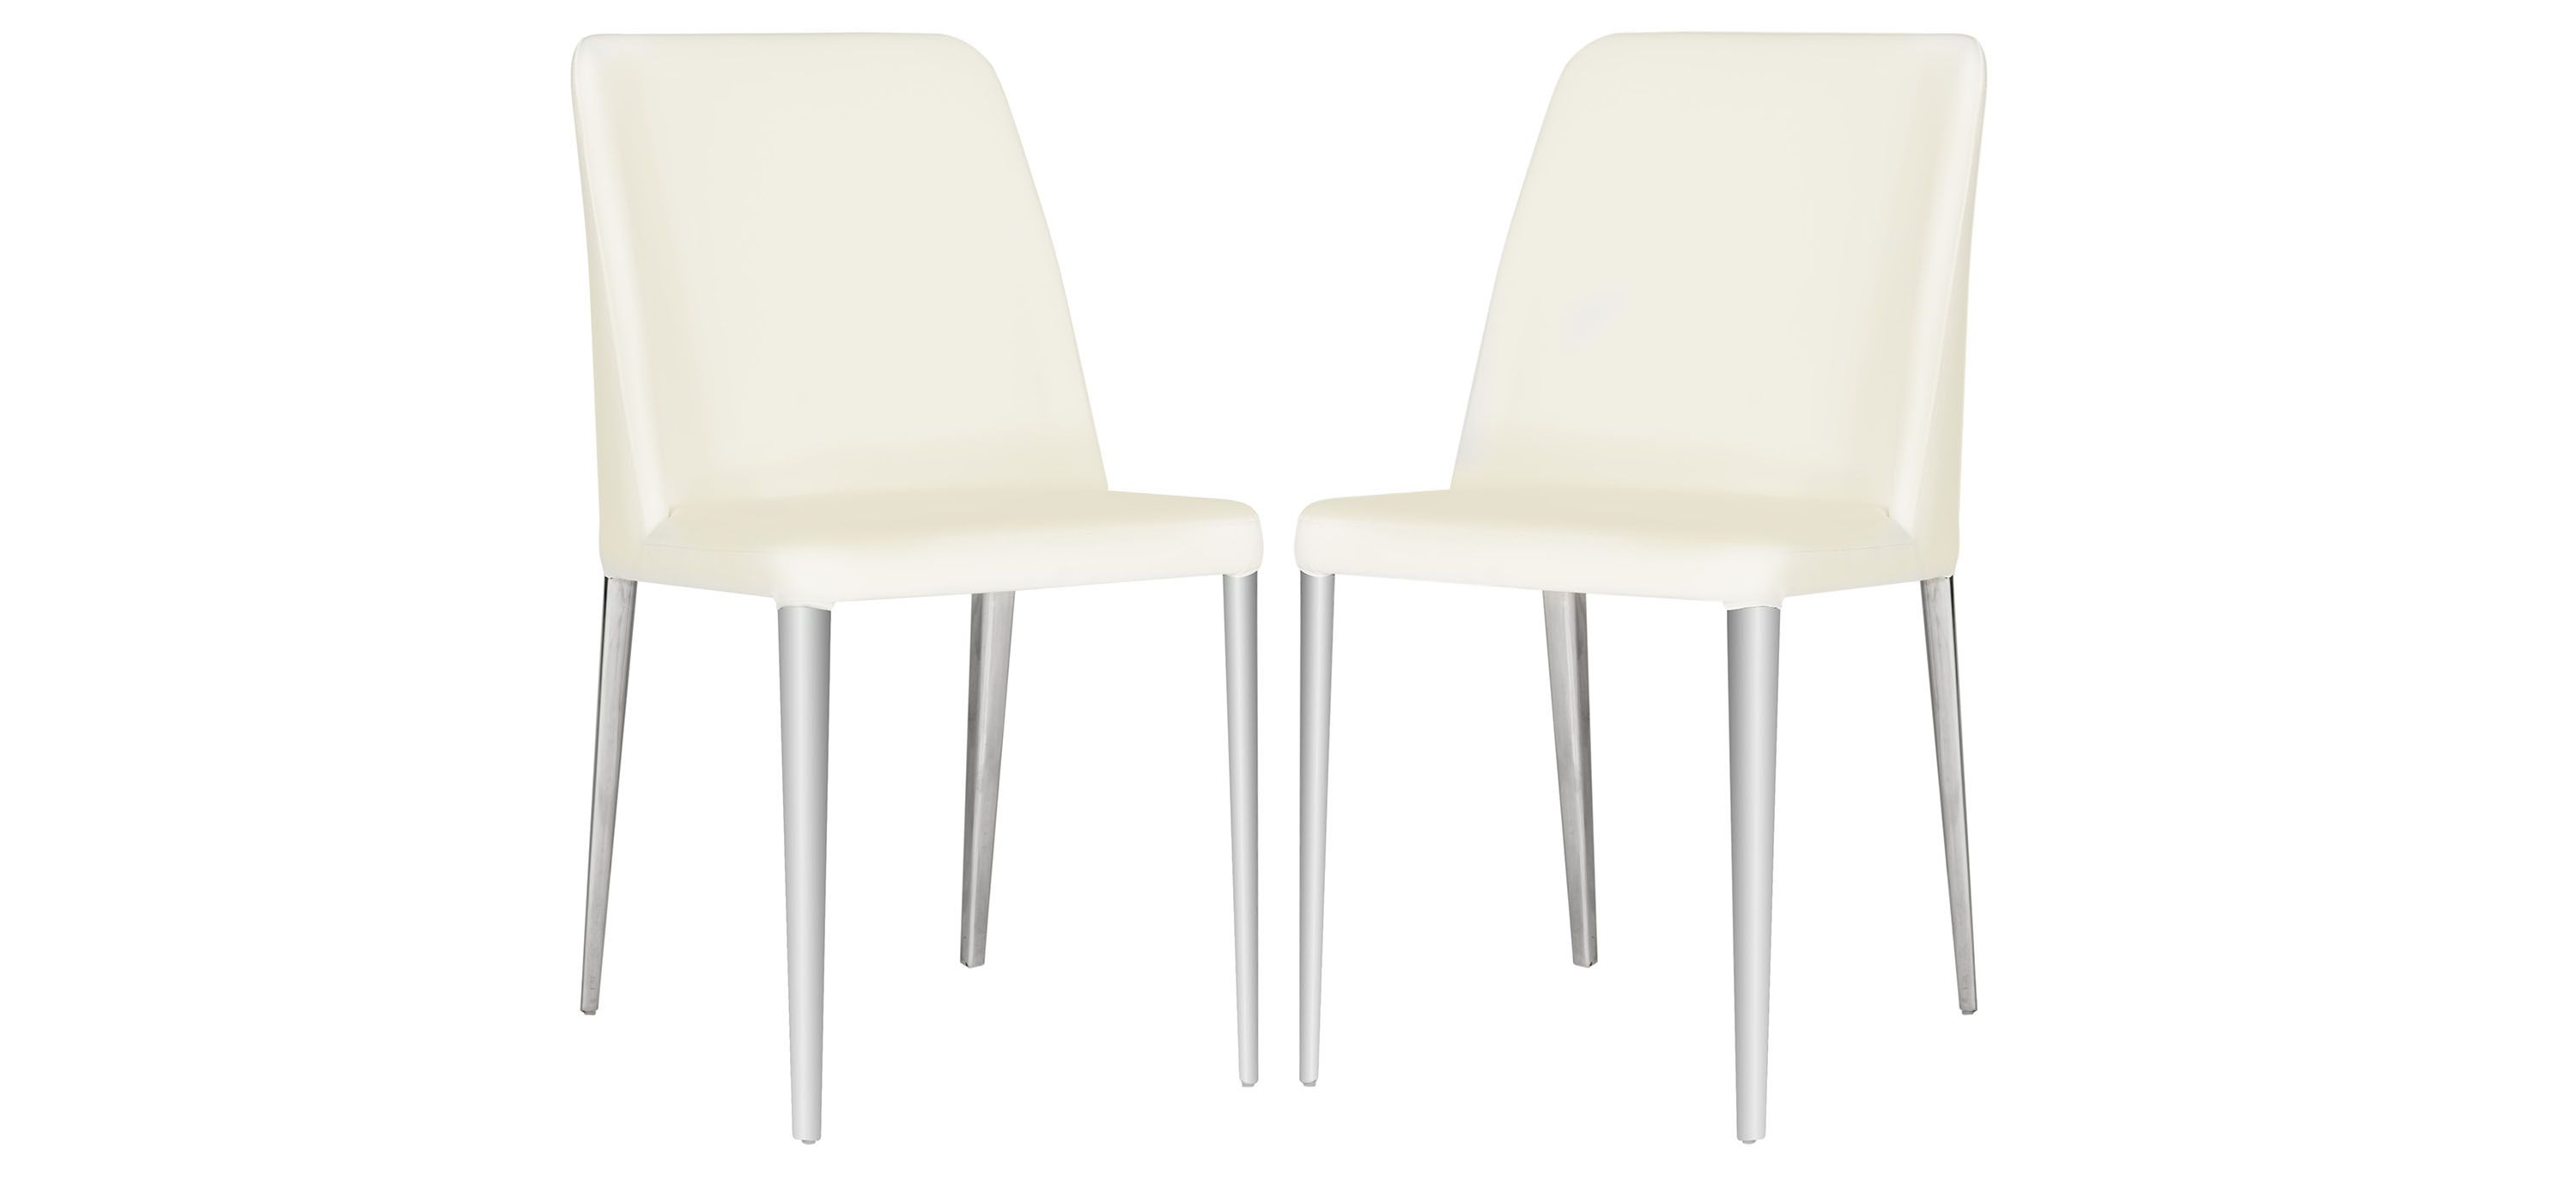 Lovell Dining Chair - Set of 2